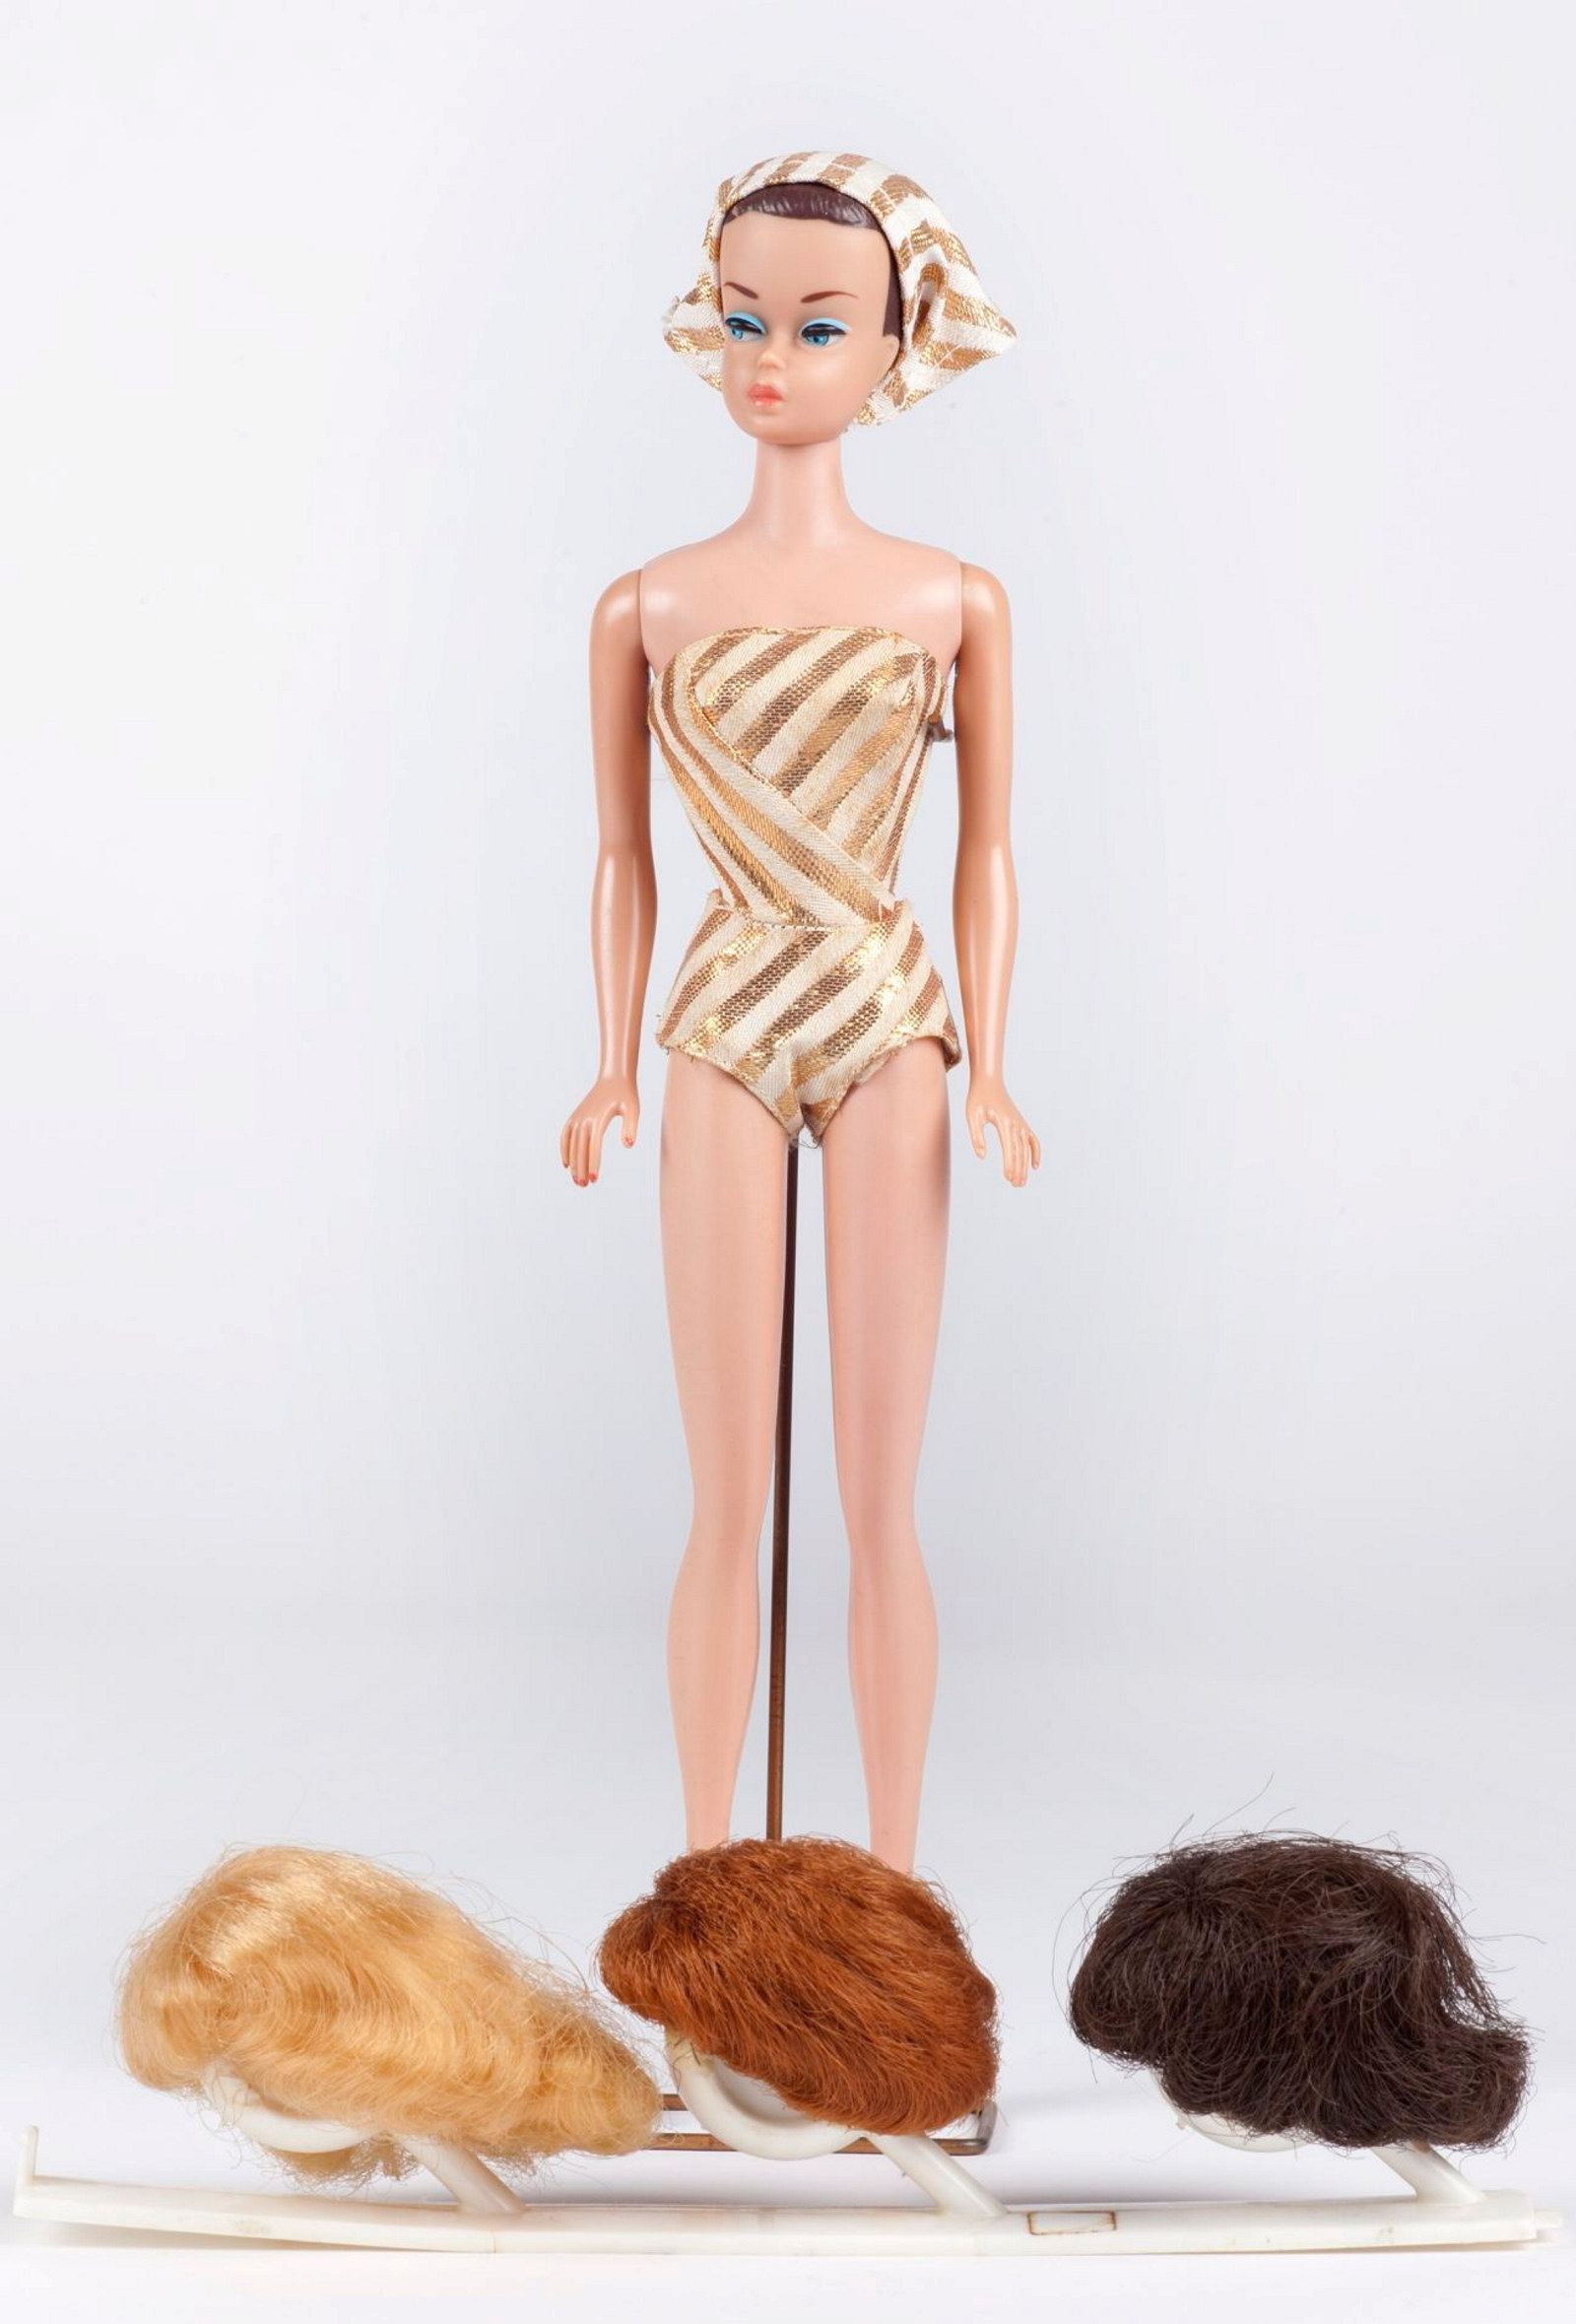 60s Barbie with array of wigs